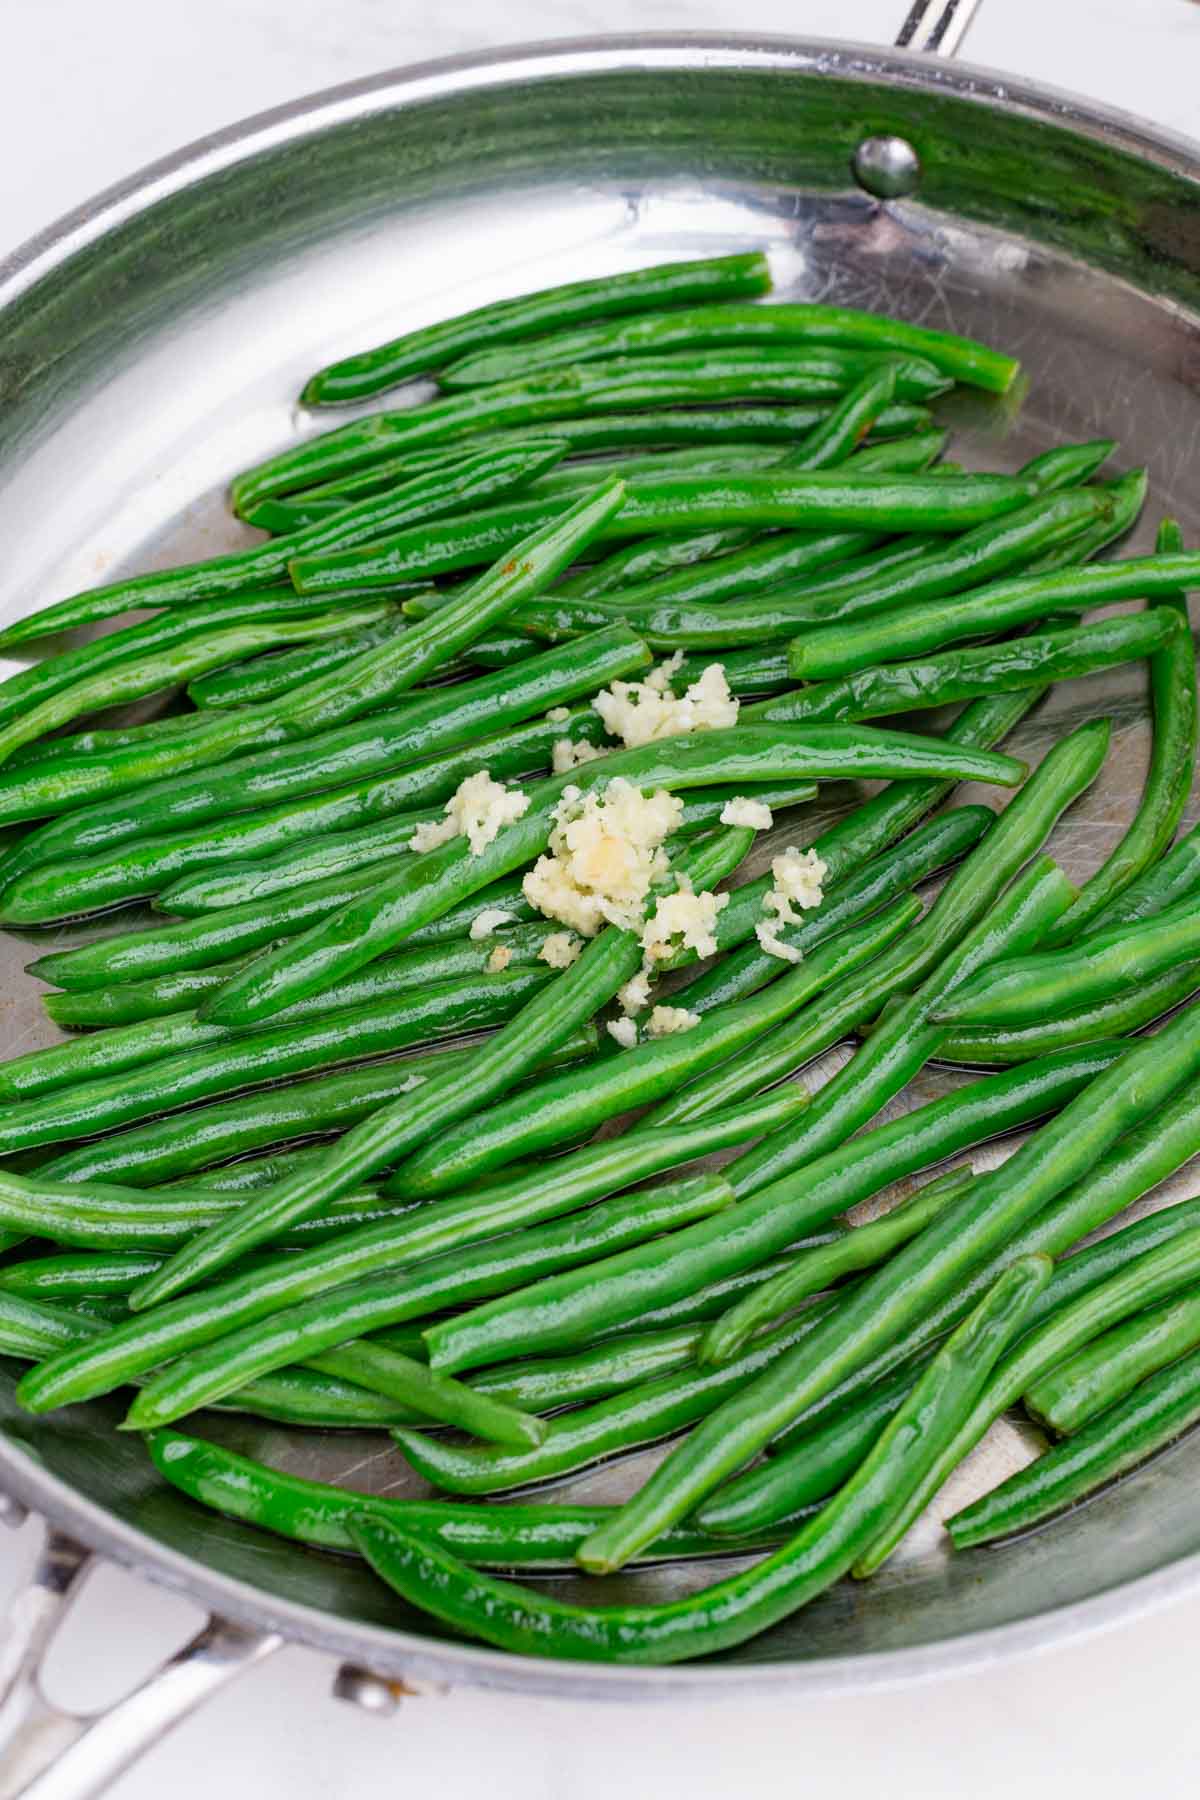 Garlic is added to the cooked green beans.